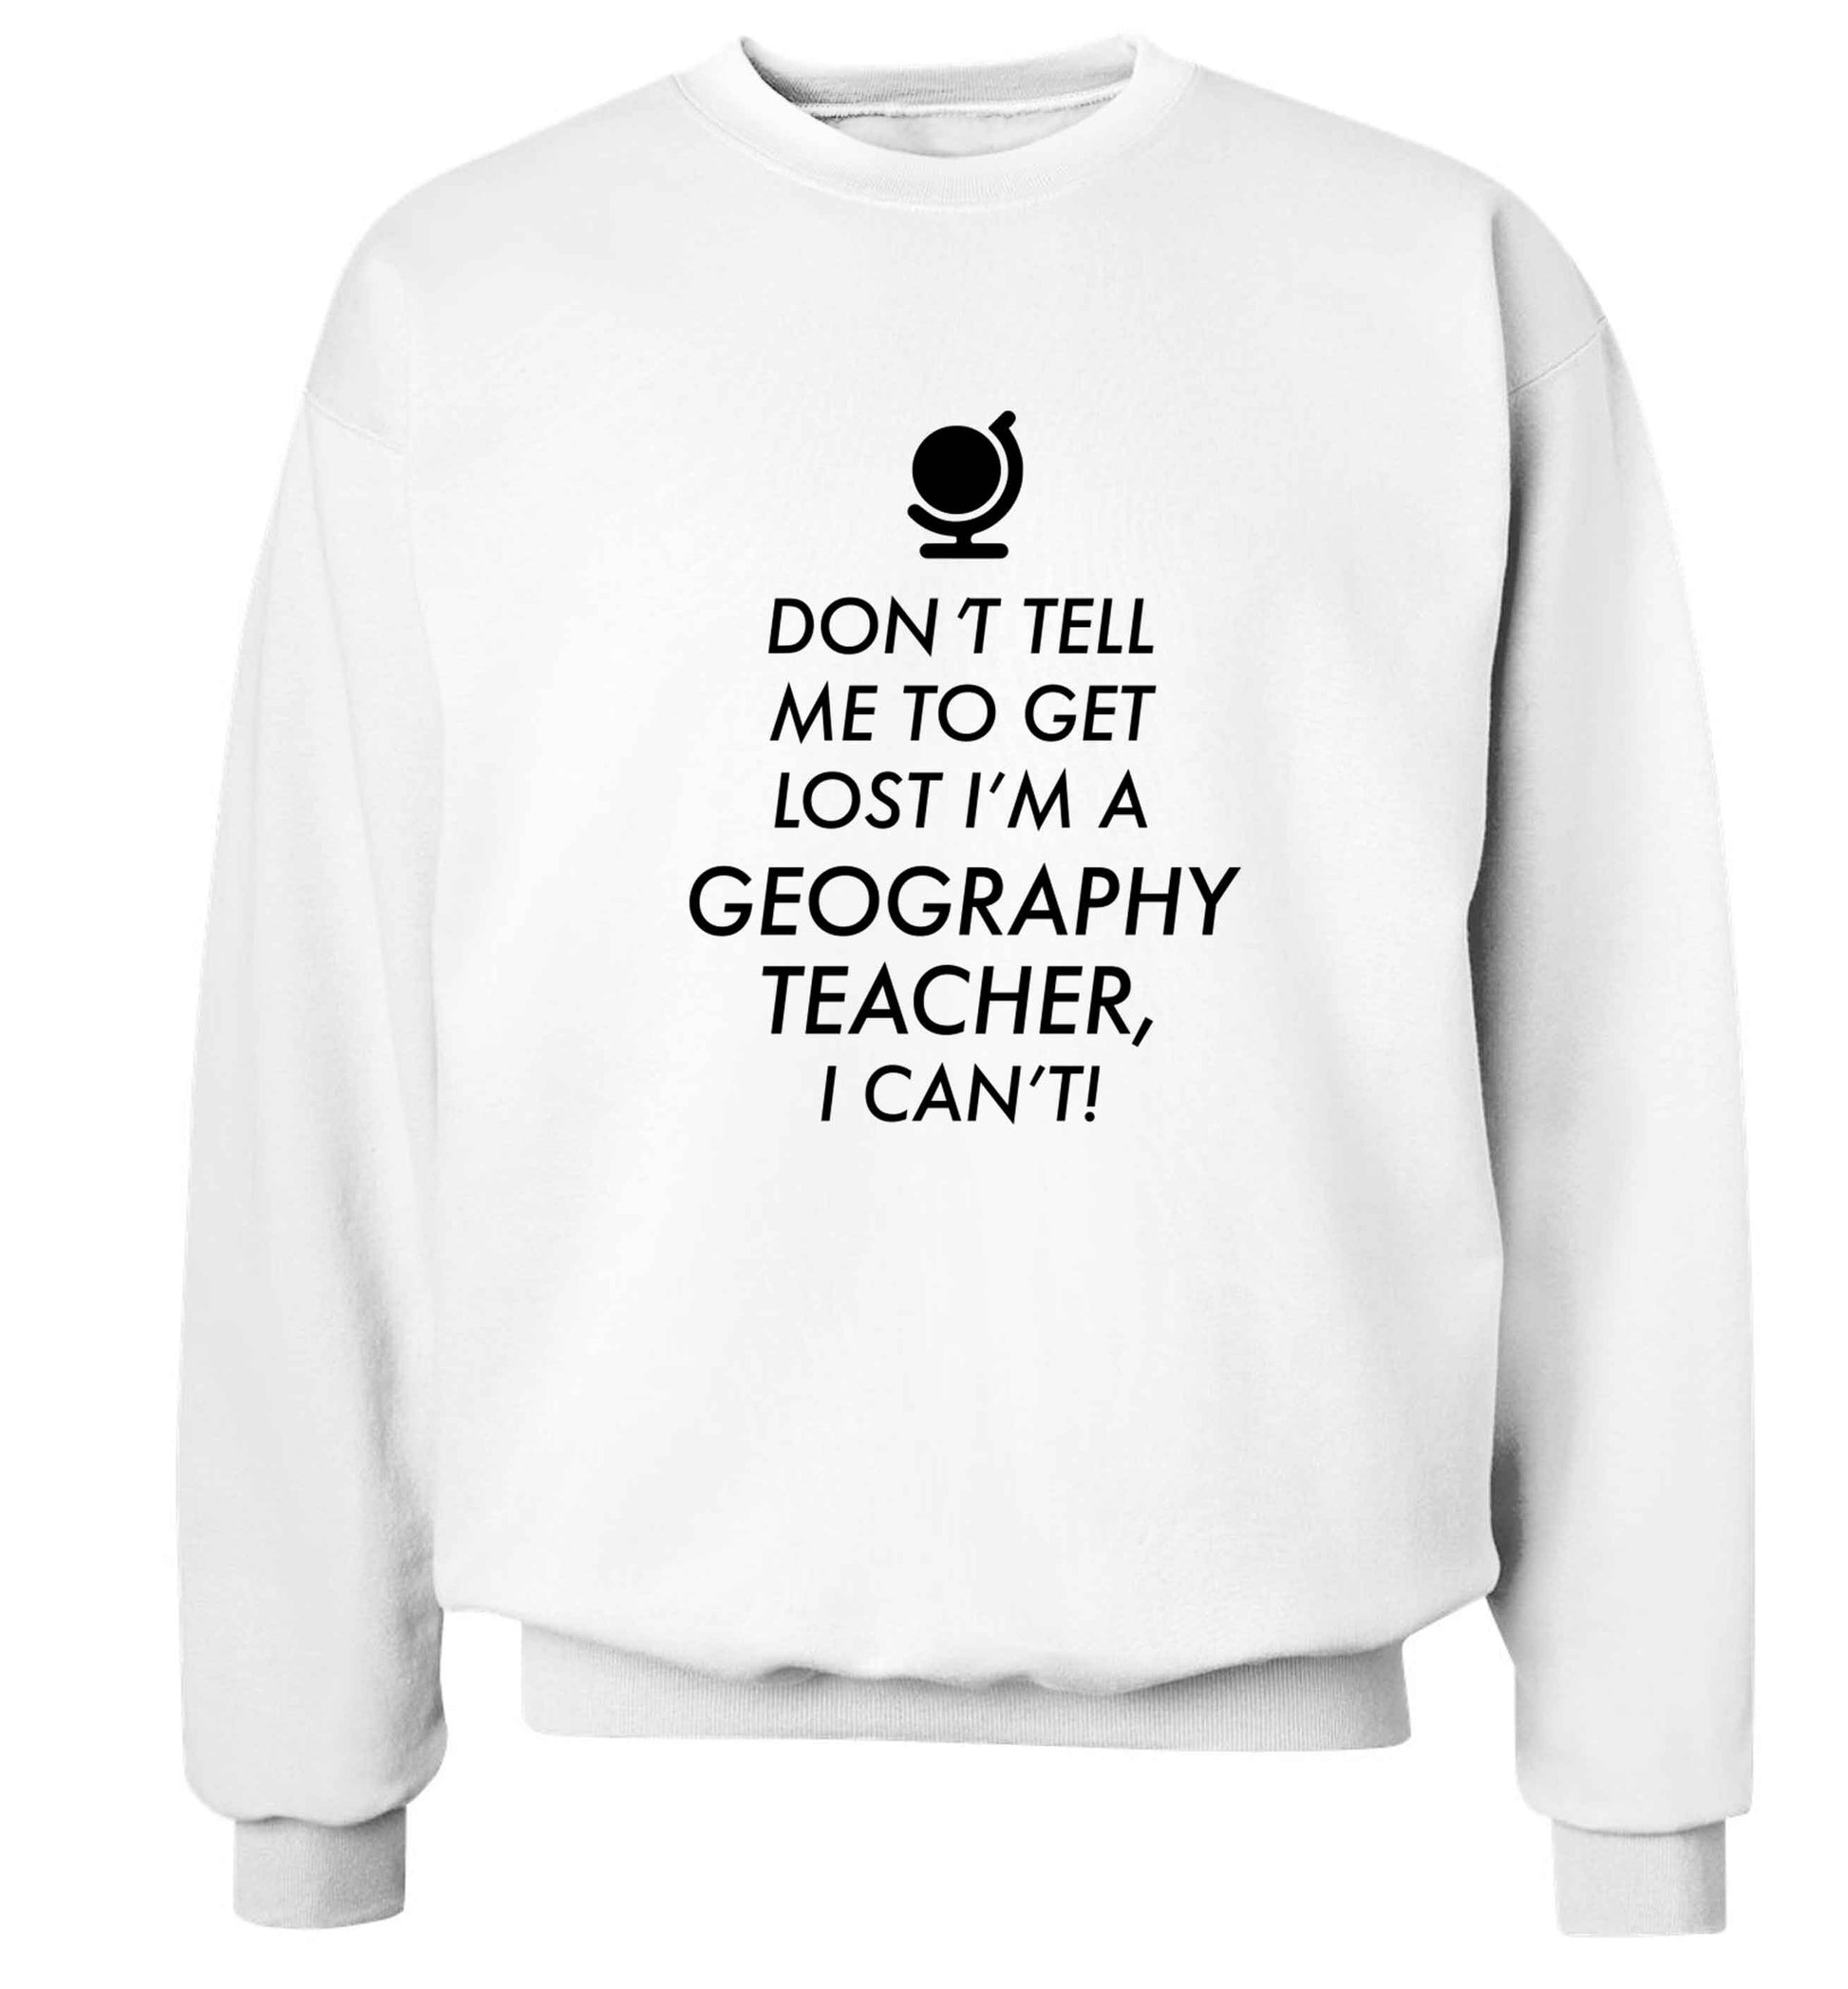 Don't tell me to get lost I'm a geography teacher, I can't Adult's unisex white Sweater 2XL